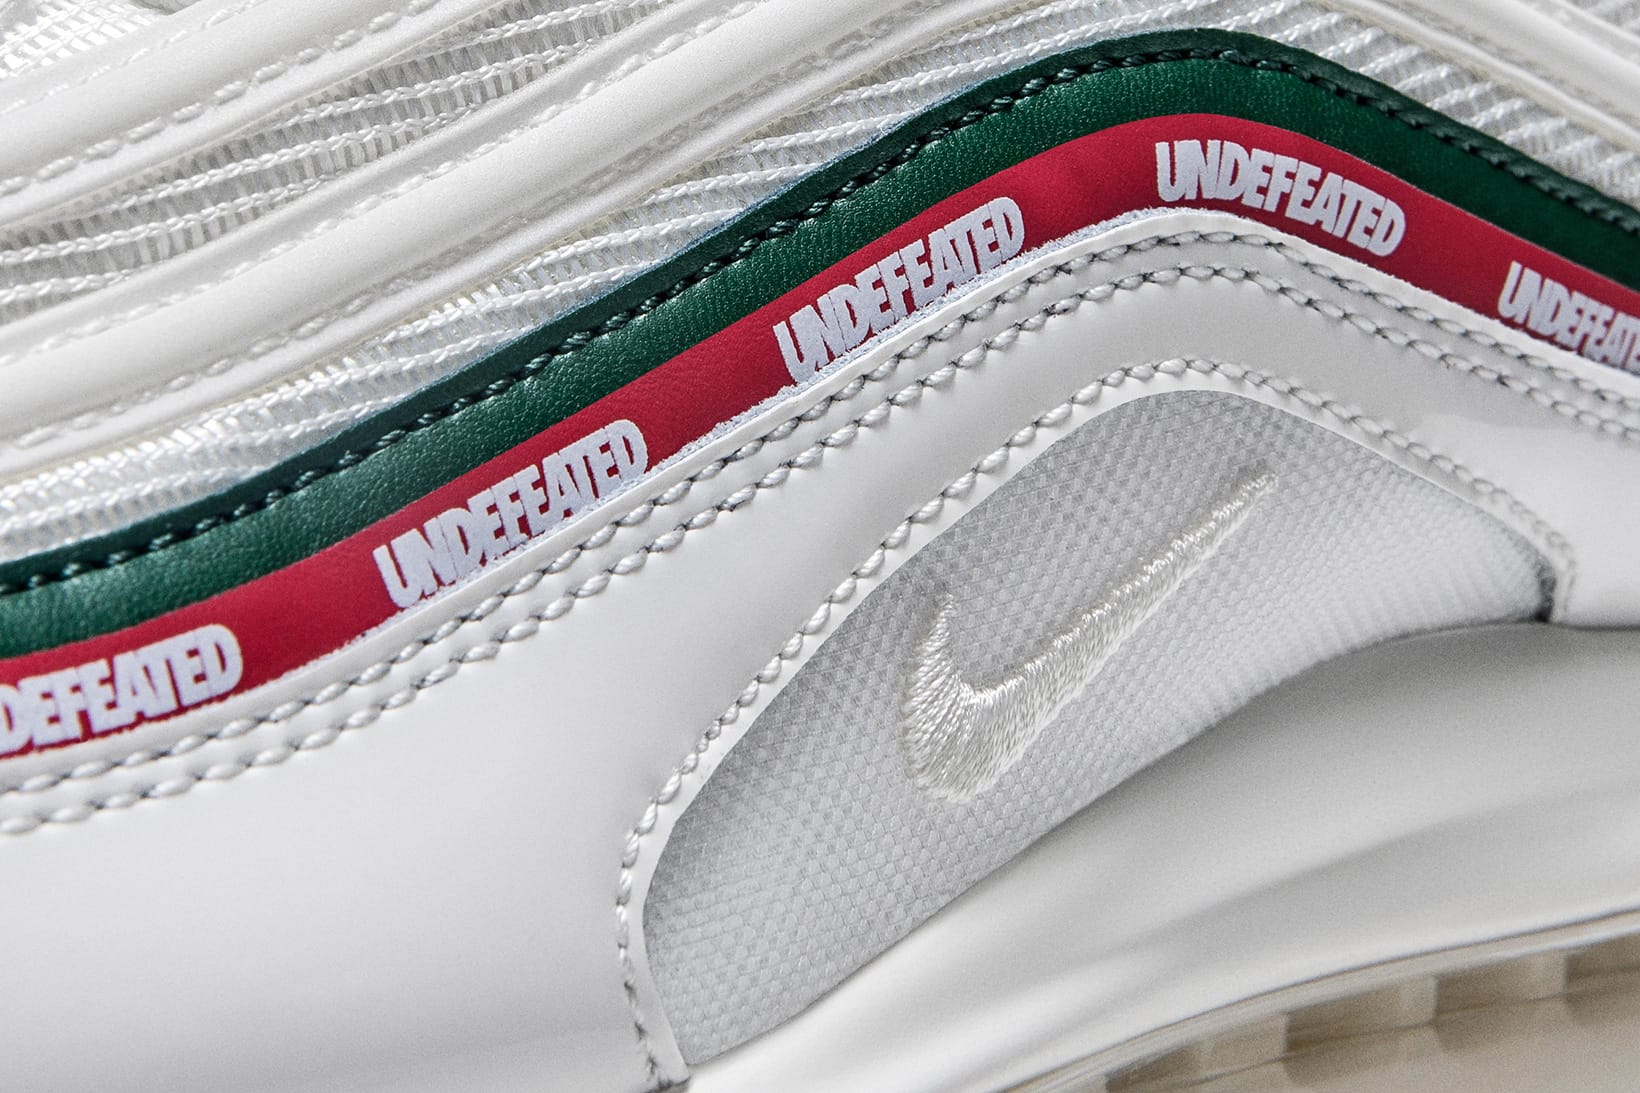 UNDEFEATED x Nike Air Max 97 OG's Official Look & Release Date